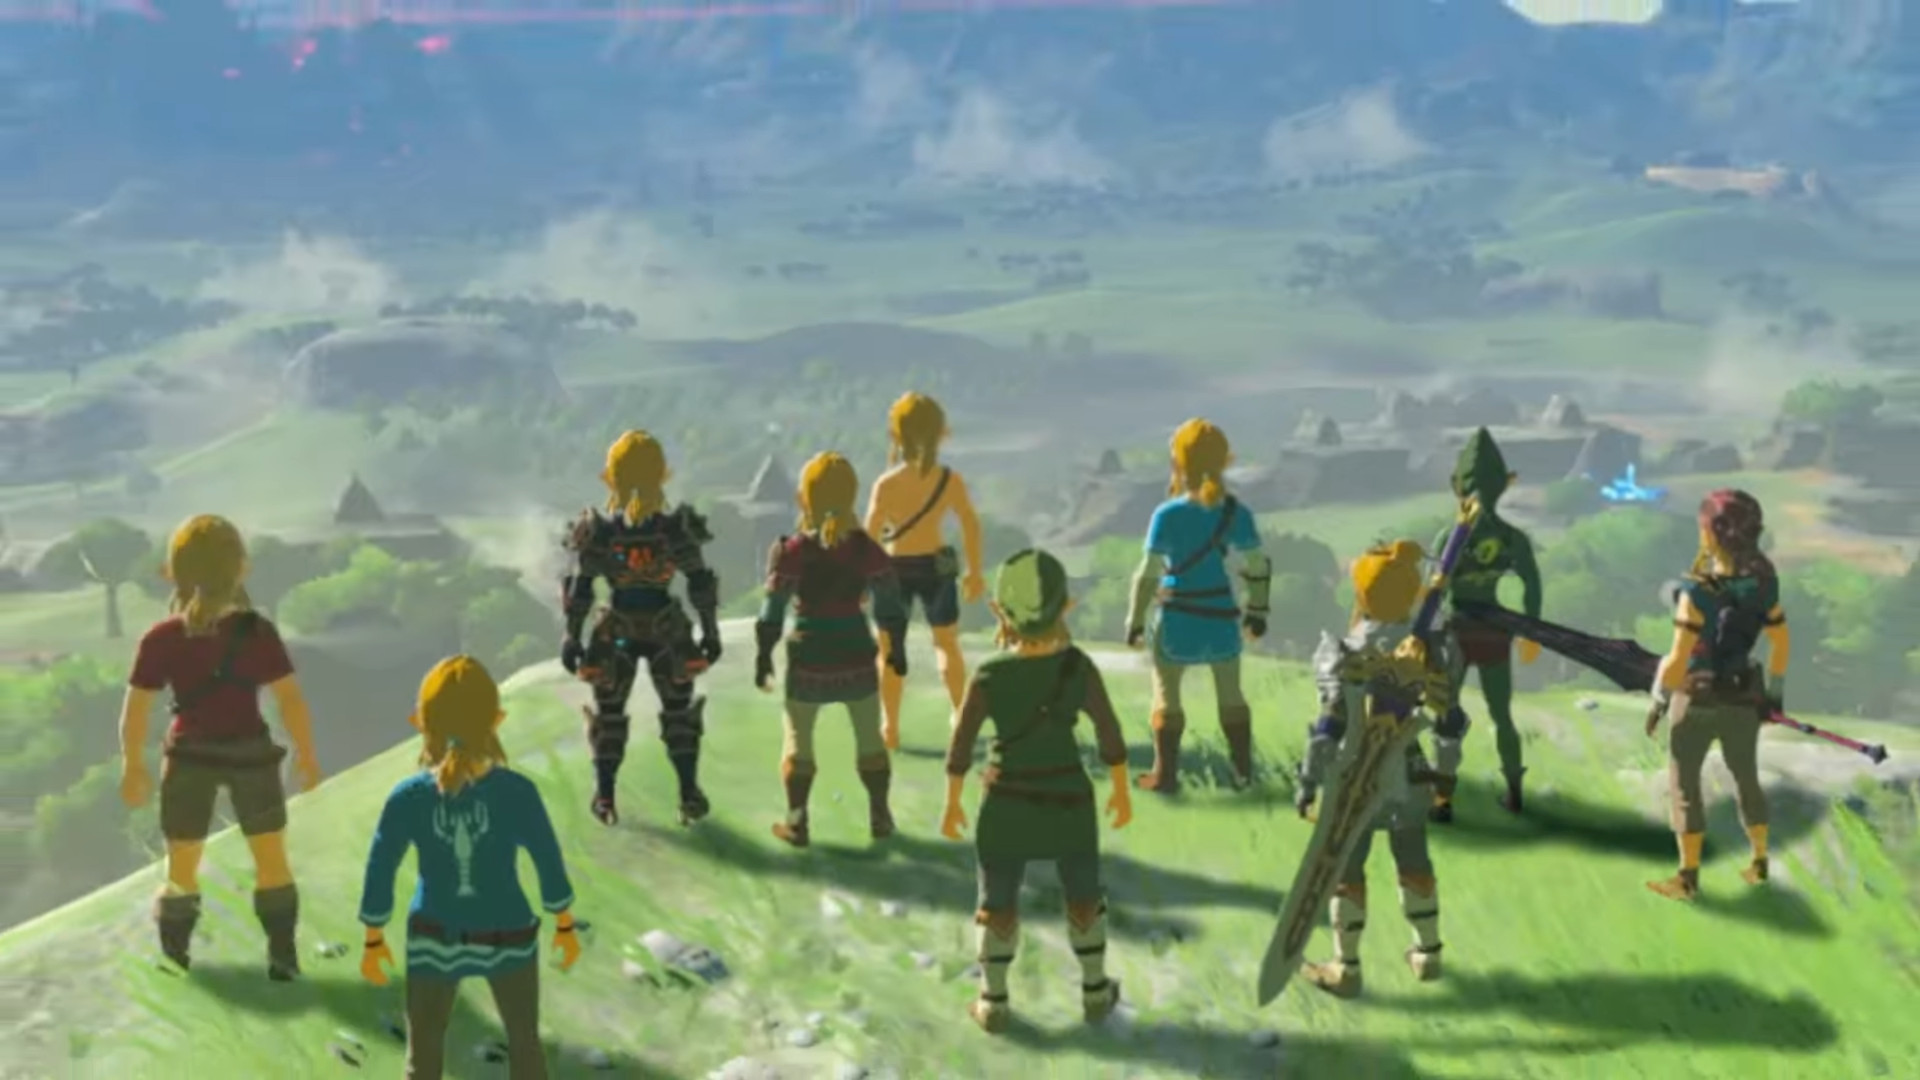 The Legend of Zelda: Breath of the Wild (for Nintendo Switch) Review